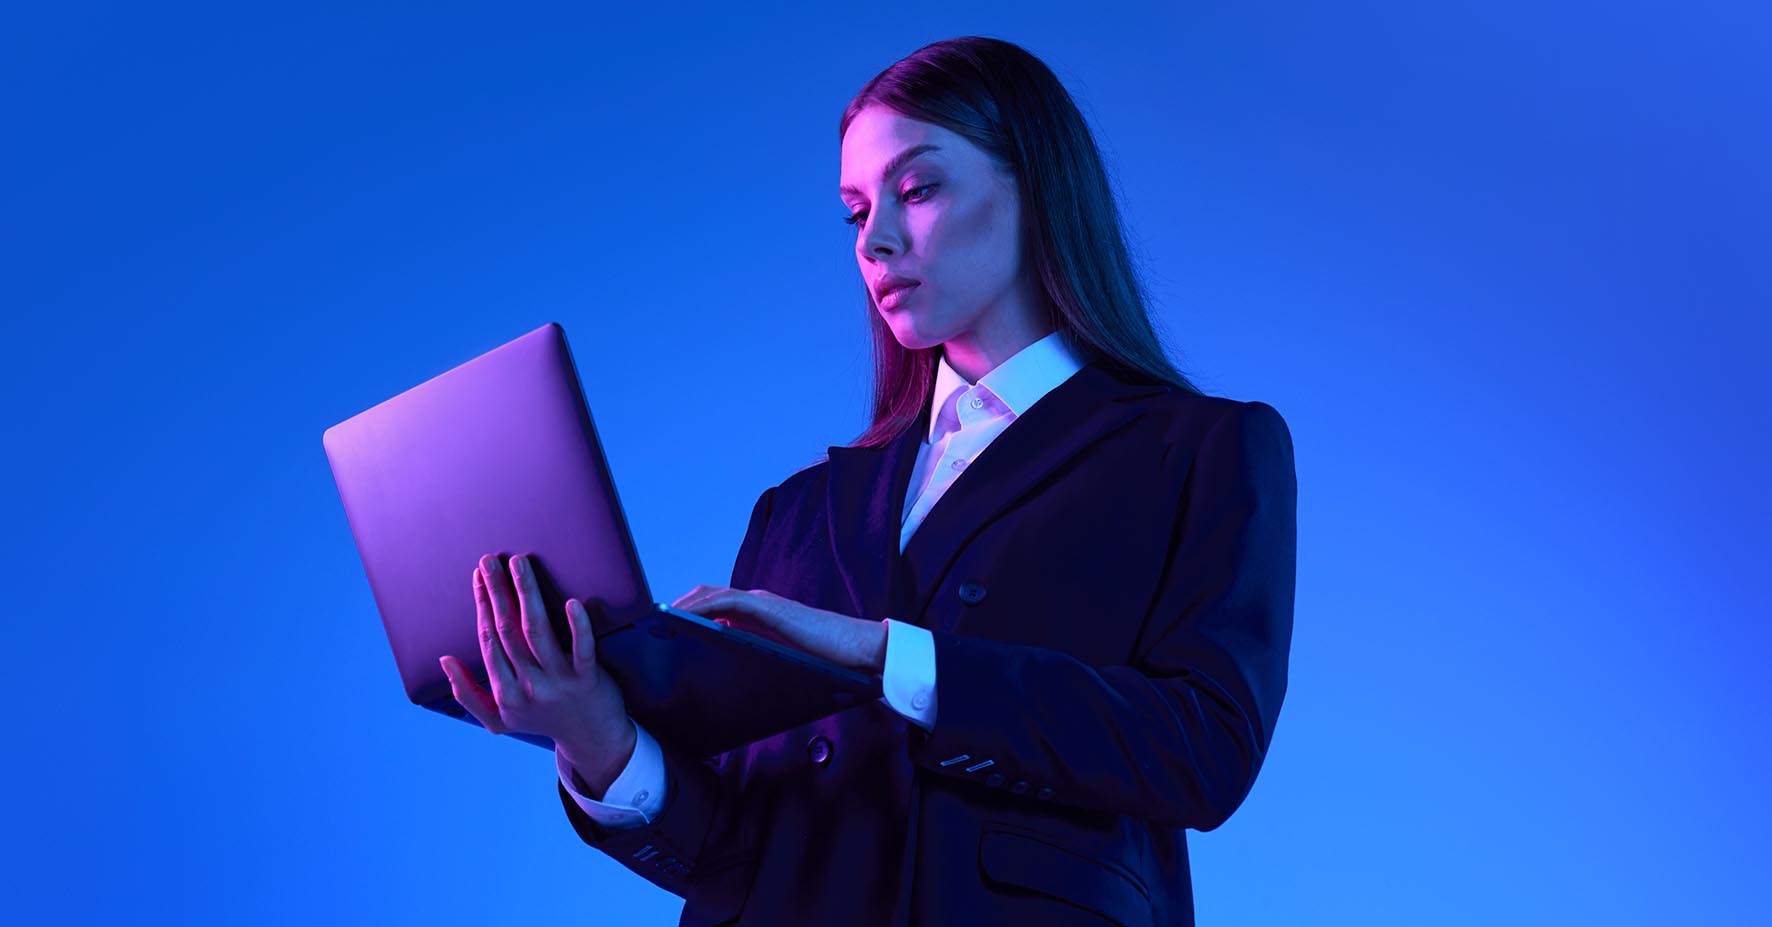 Woman in suit standing using computer, blue background